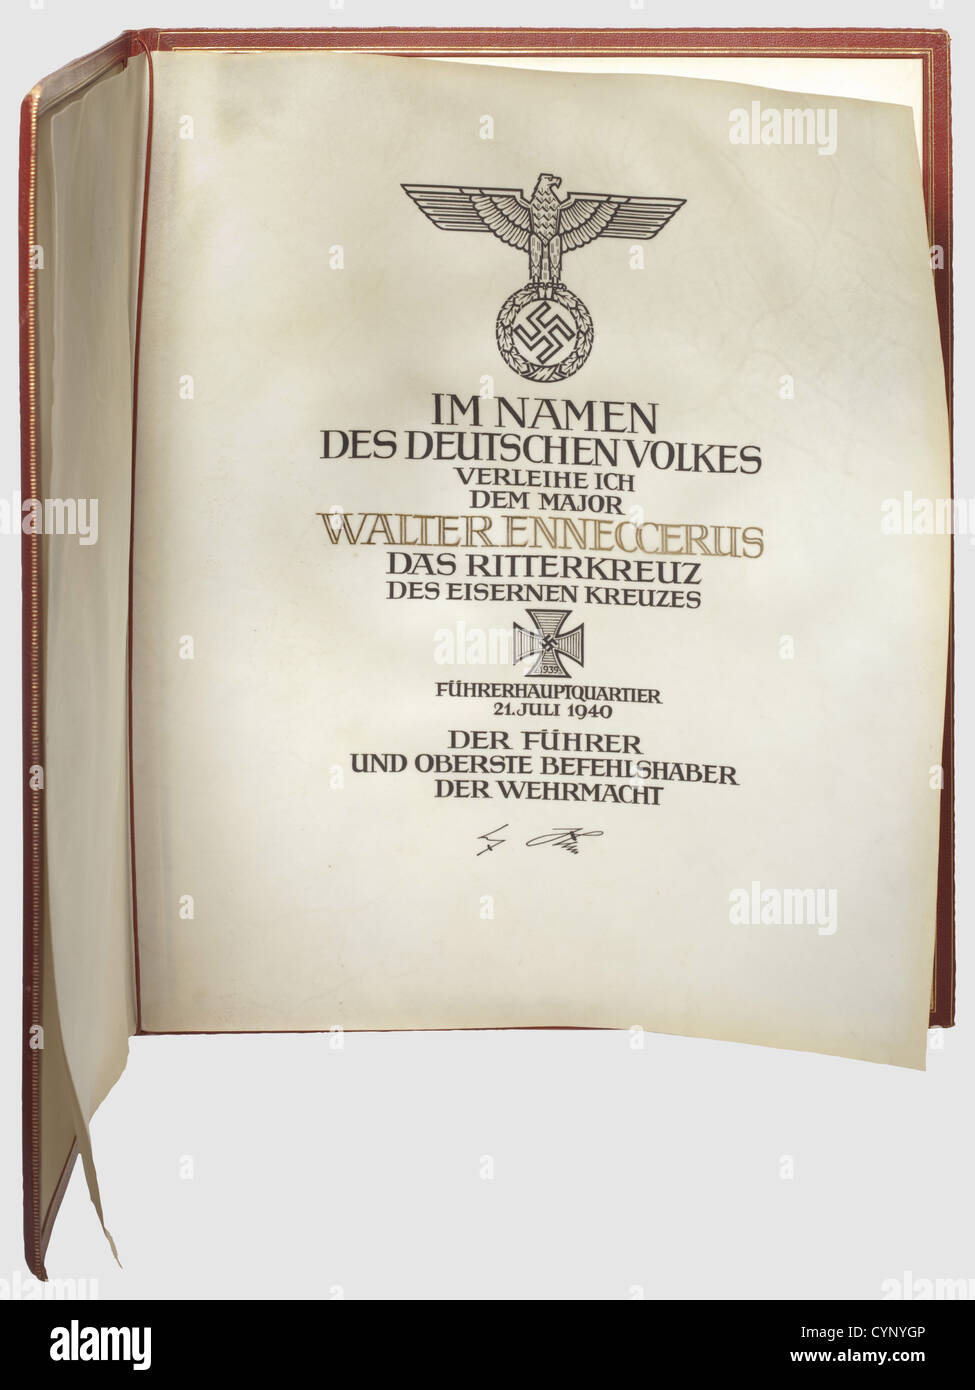 Hauptmann Walter Ennecerus - an award certificate and folder for the Knight's Cross of the Iron Cross 1939 dated 21 Juli 1940,A large format,double-sheet,parchment document with the text of the citation in black ink calligraphy and raised gold over Hitler's signature in ink. Very well preserved,the parchment is lightly spotted and the material shows some undulation. In the original award folder of red leather with gold-stamped decoration,the right side of the pa historic,historical,1930s,20th century,Air Force,branch of service,branches of service,a,Additional-Rights-Clearences-Not Available Stock Photo